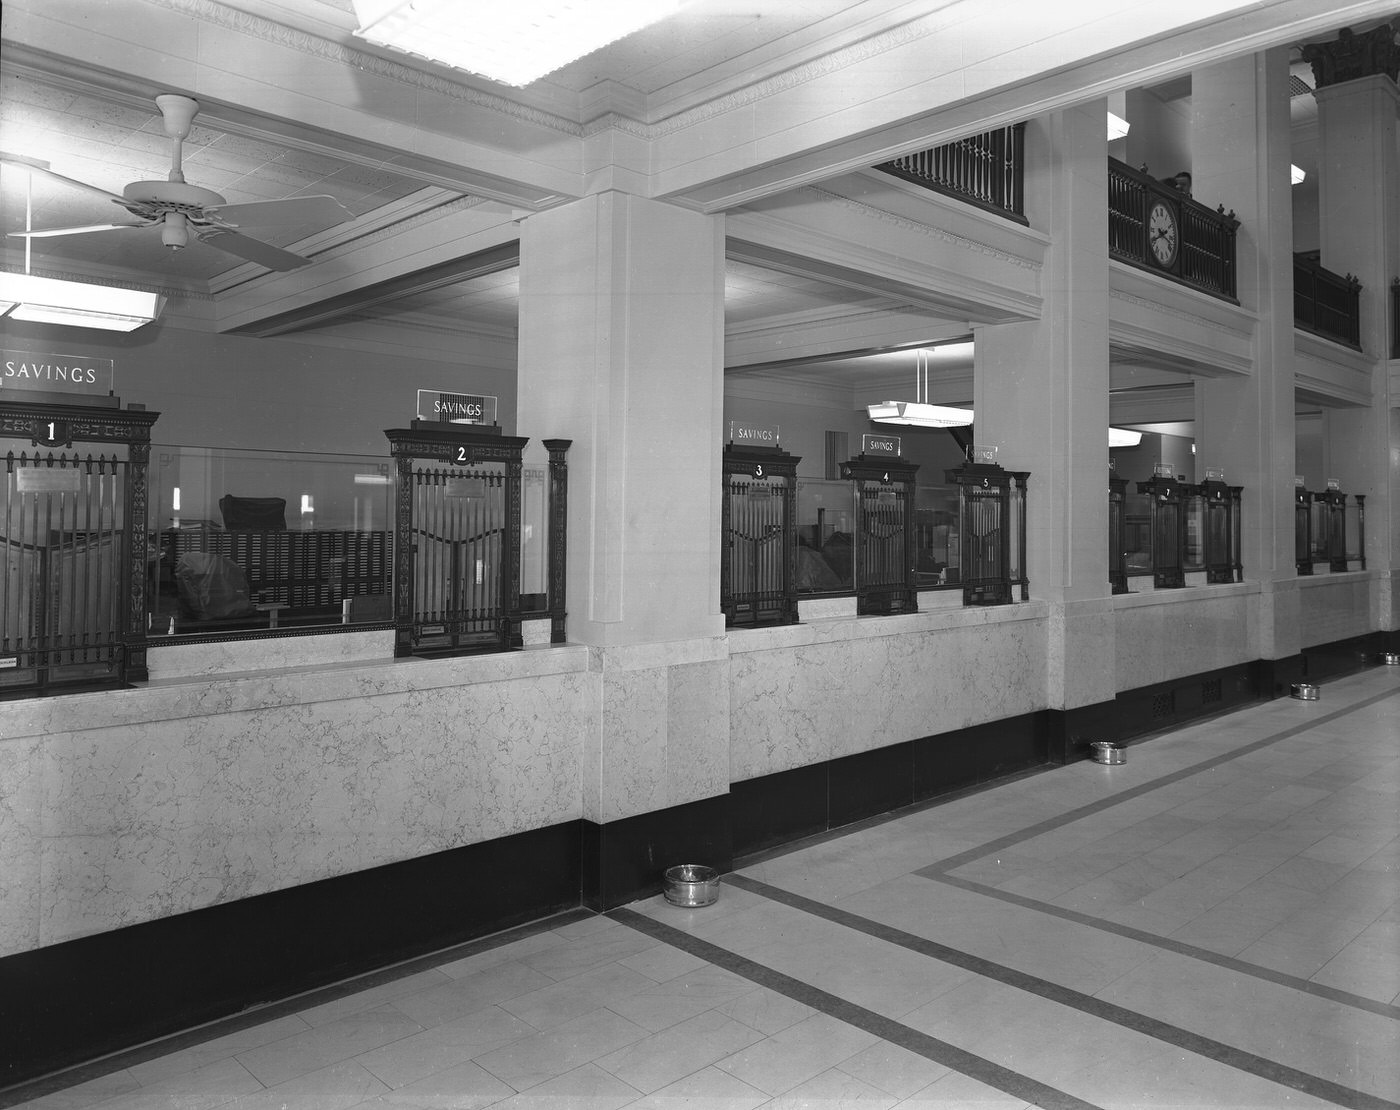 Teller windows in First National Bank, Fort Worth, Texas, 1949